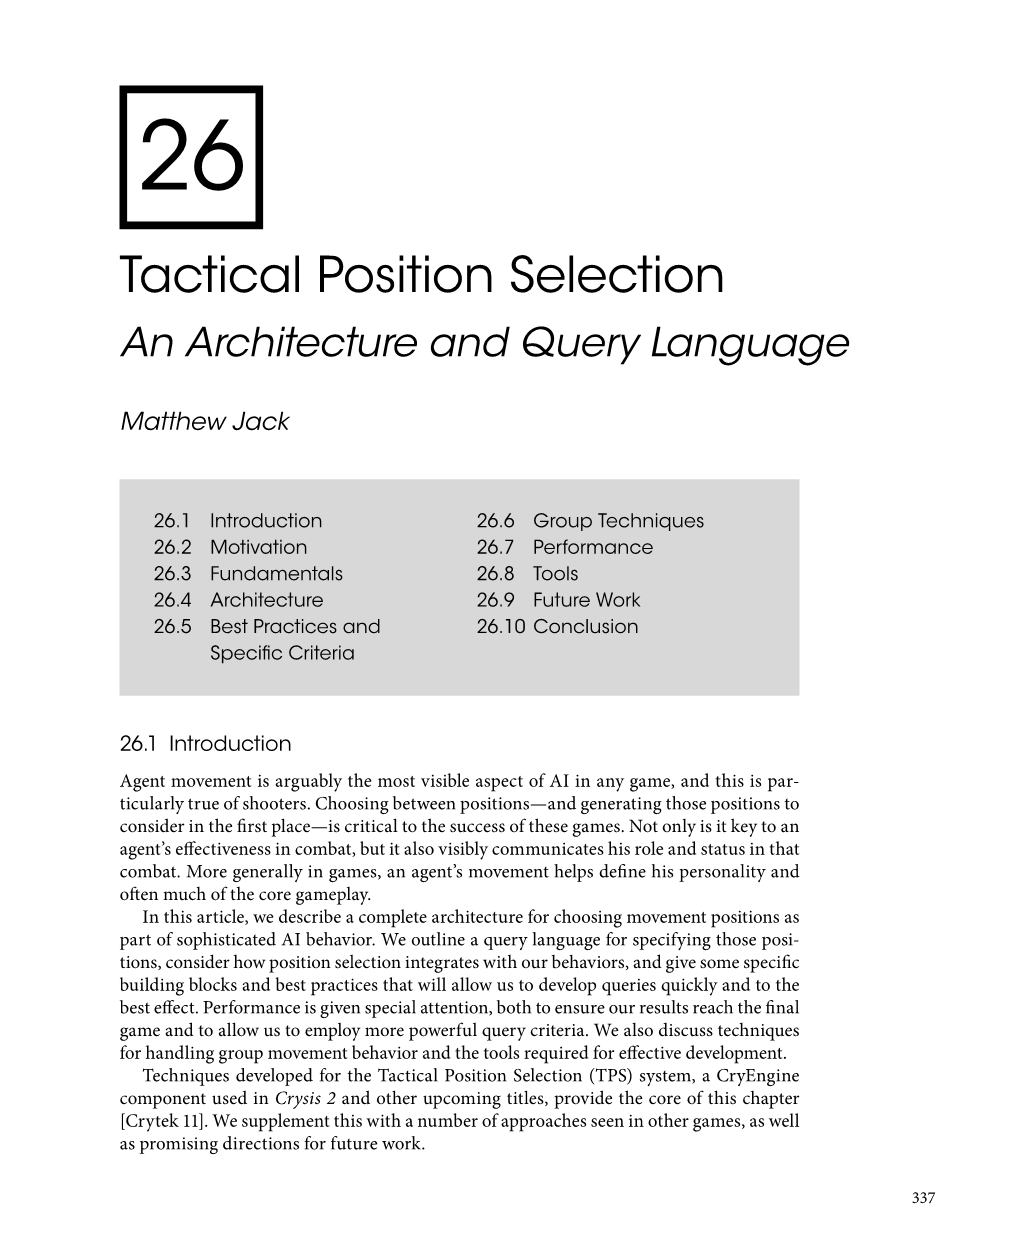 Tactical Position Selection: an Architecture and Query Language